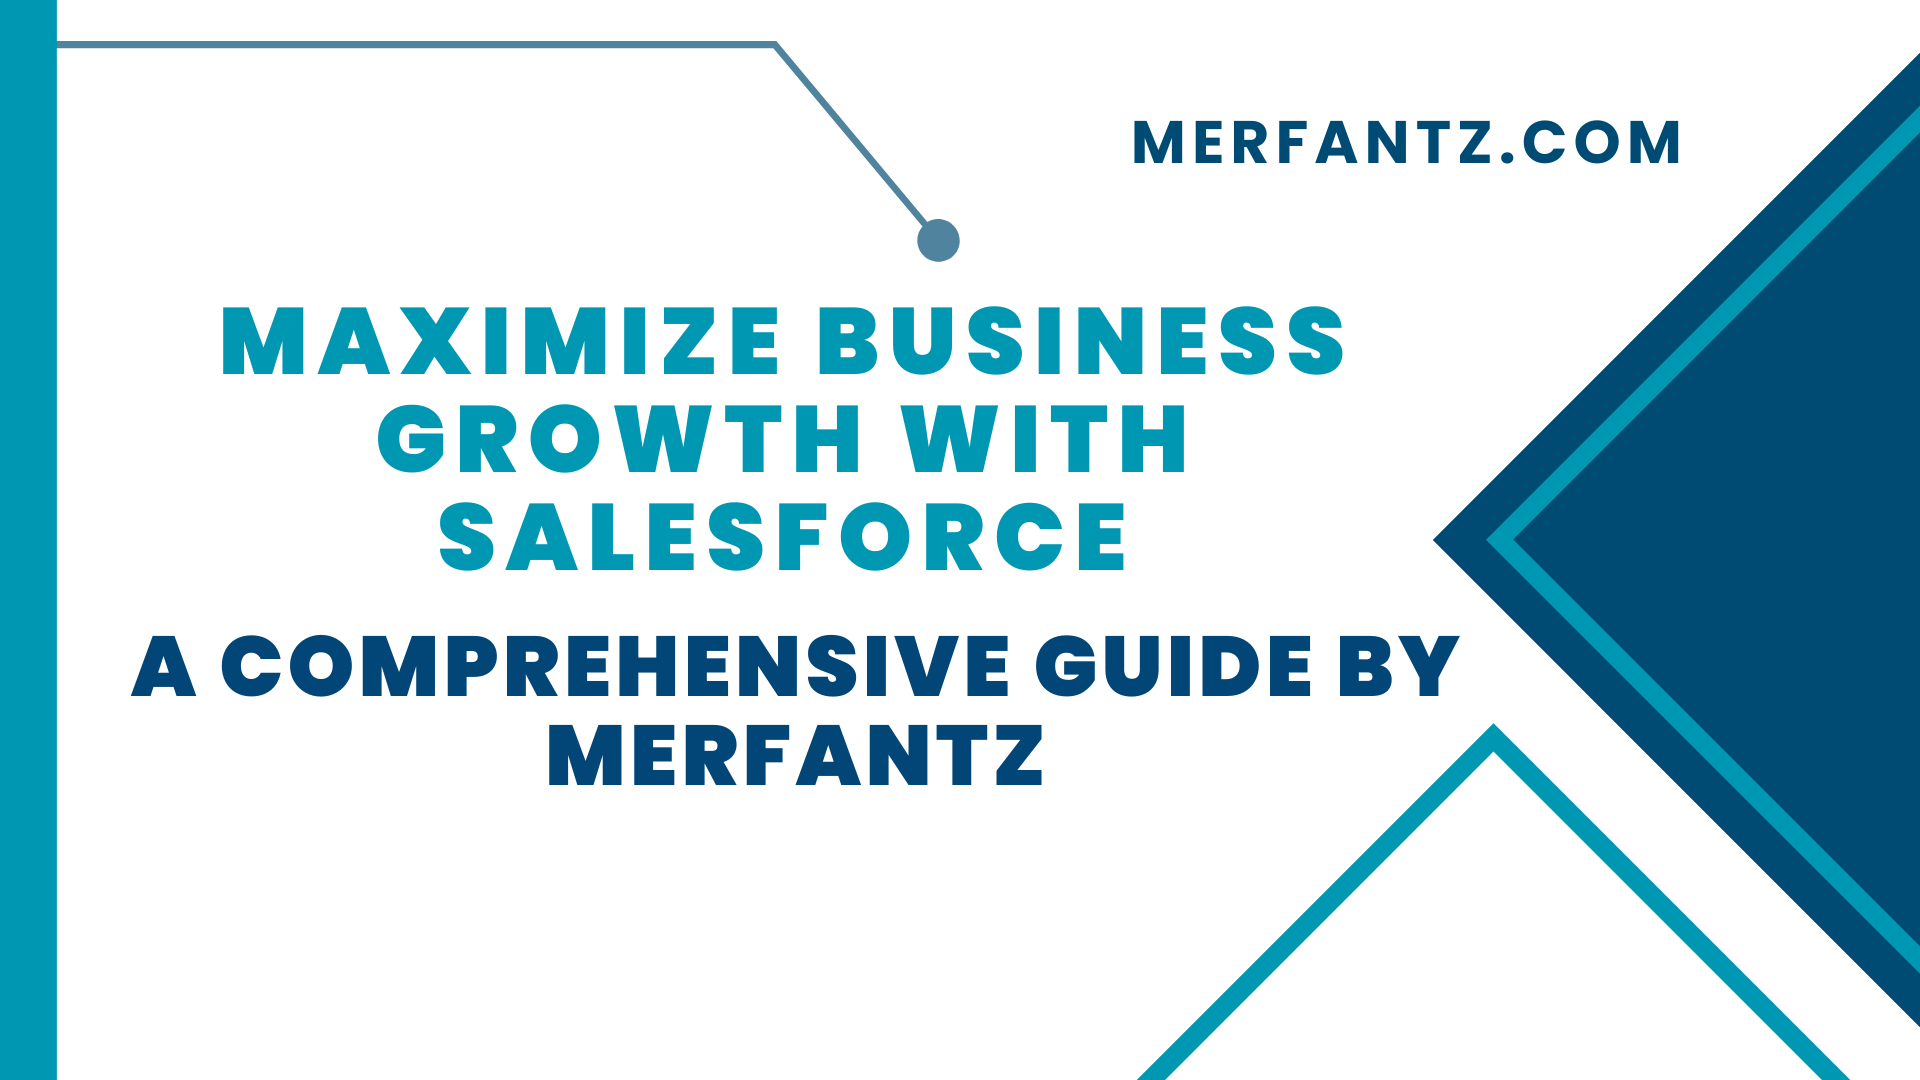 Maximize Business Growth with Salesforce A Comprehensive Guide by Merfantz